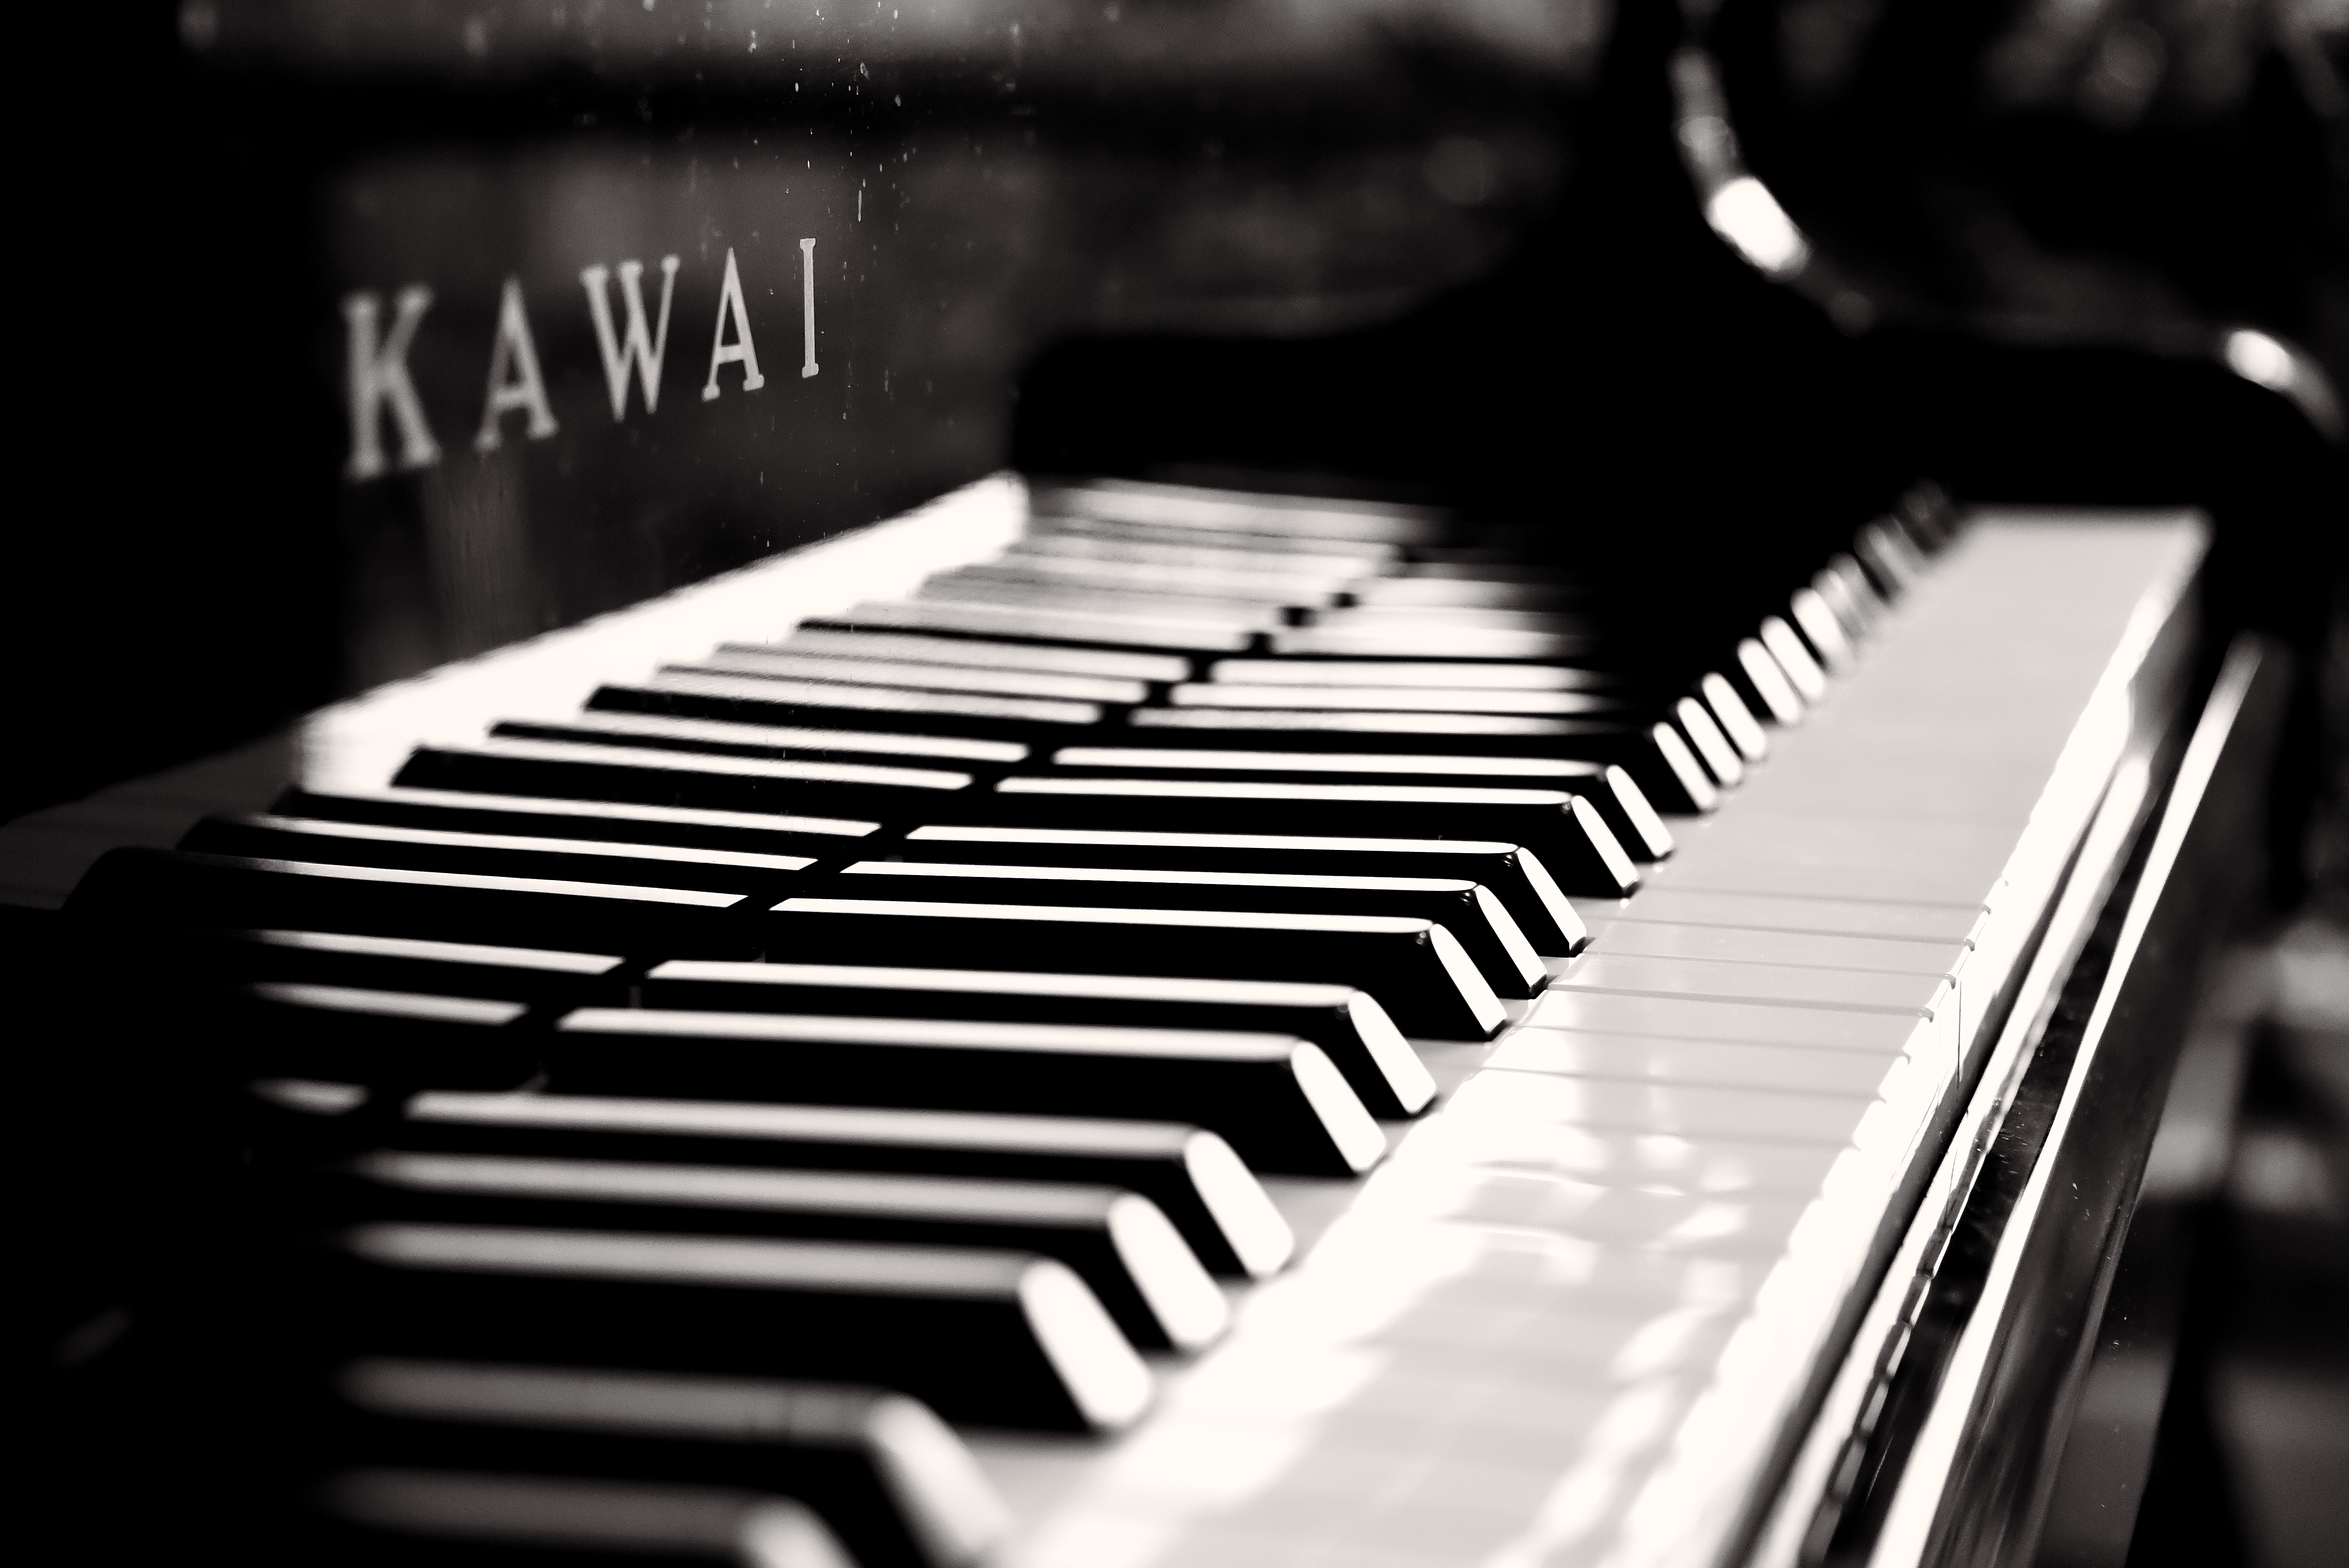 150272 download wallpaper music, piano, musical instrument, bw, chb, keys screensavers and pictures for free